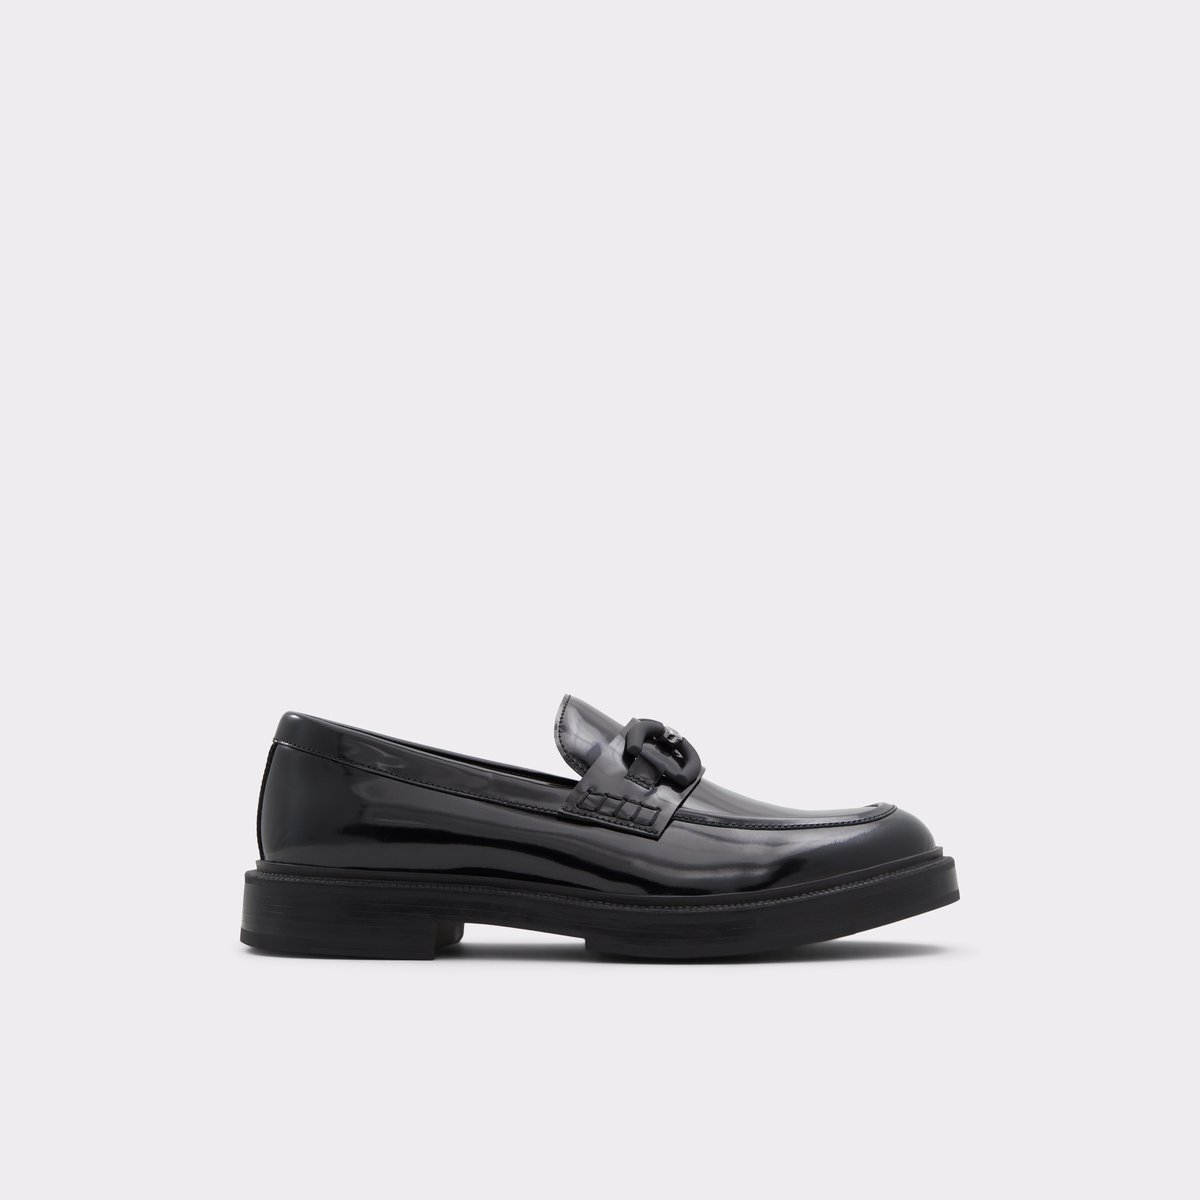 skip and loafer wallet｜TikTok Search